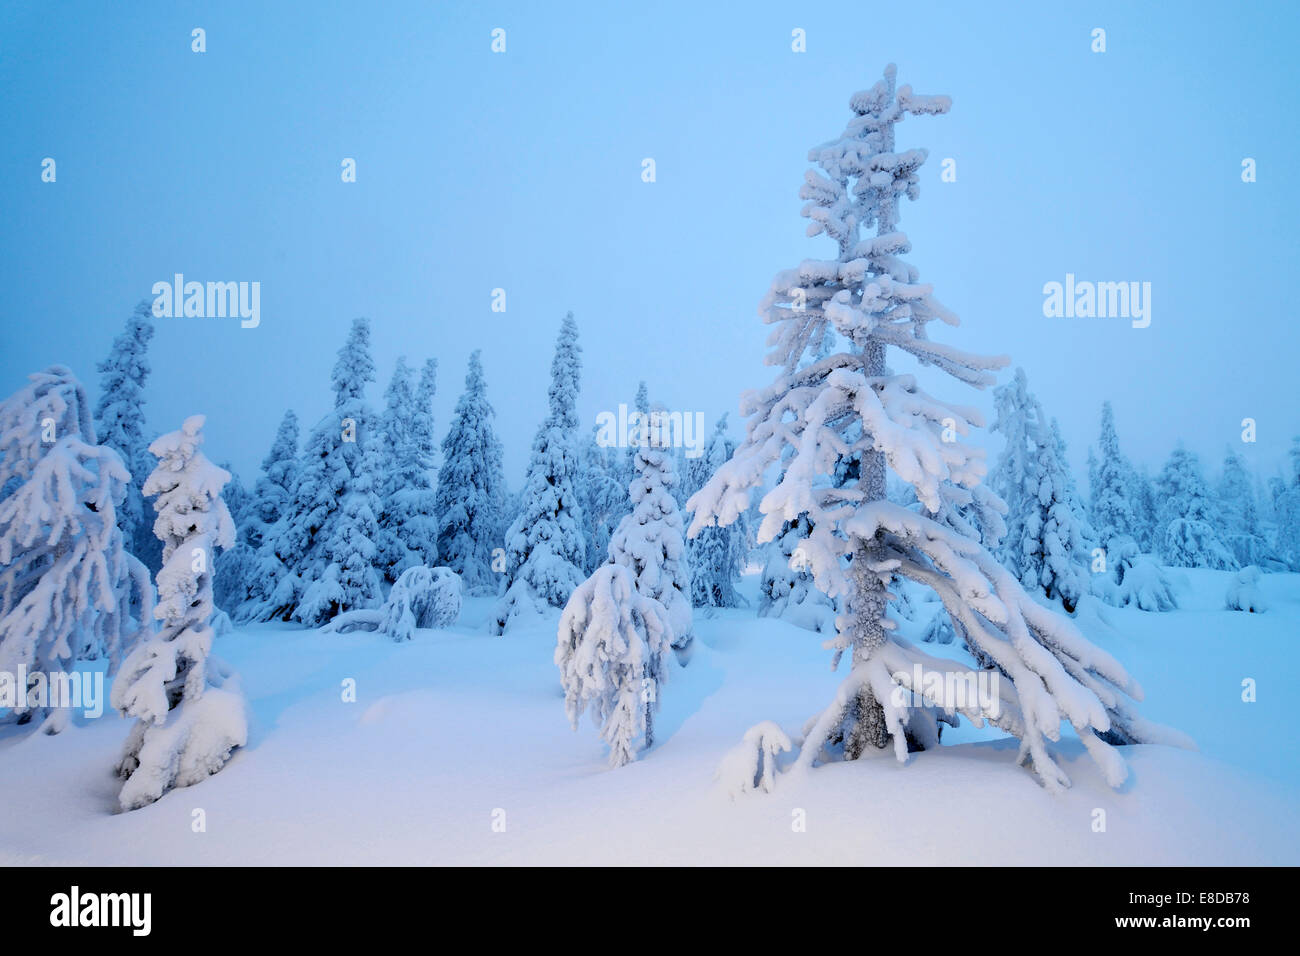 Trees in a snow-covered winter landscape, Iso Syöte, Lapland, Finland Stock Photo